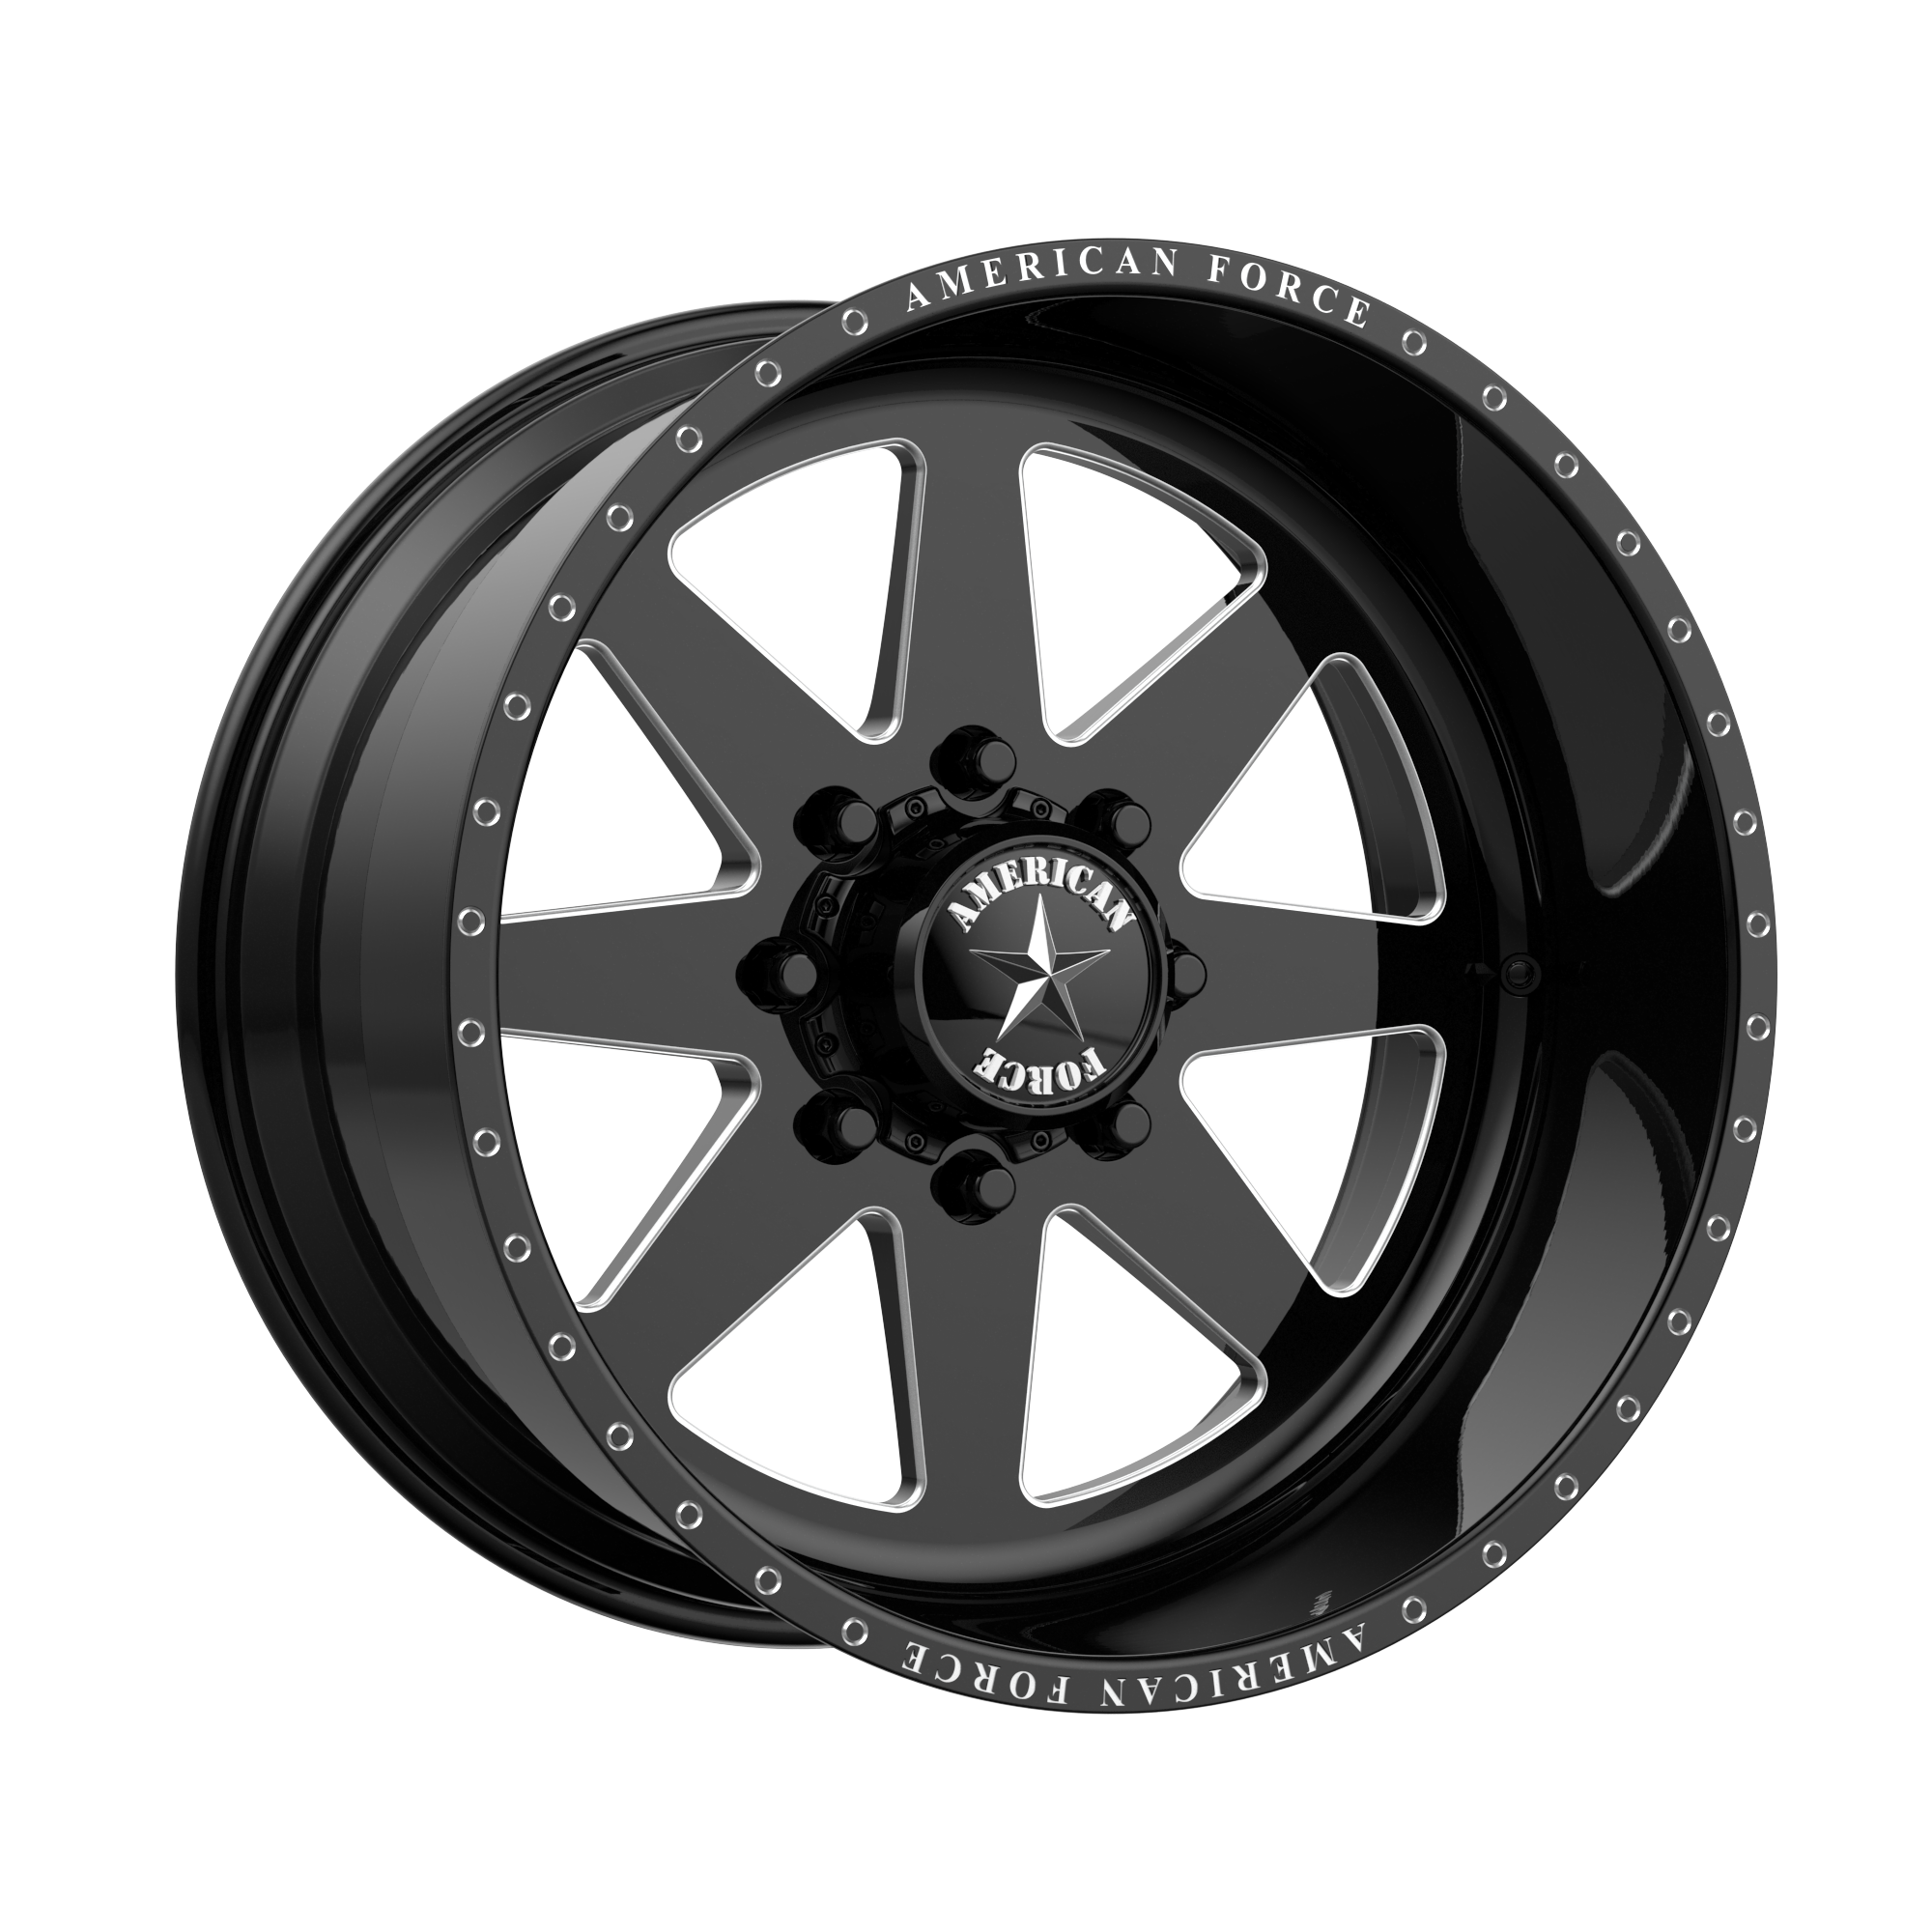 INDEPENDENCE SS 24x14 8x170.00 GLOSS BLACK MACHINED (-73 mm) - Tires and Engine Performance